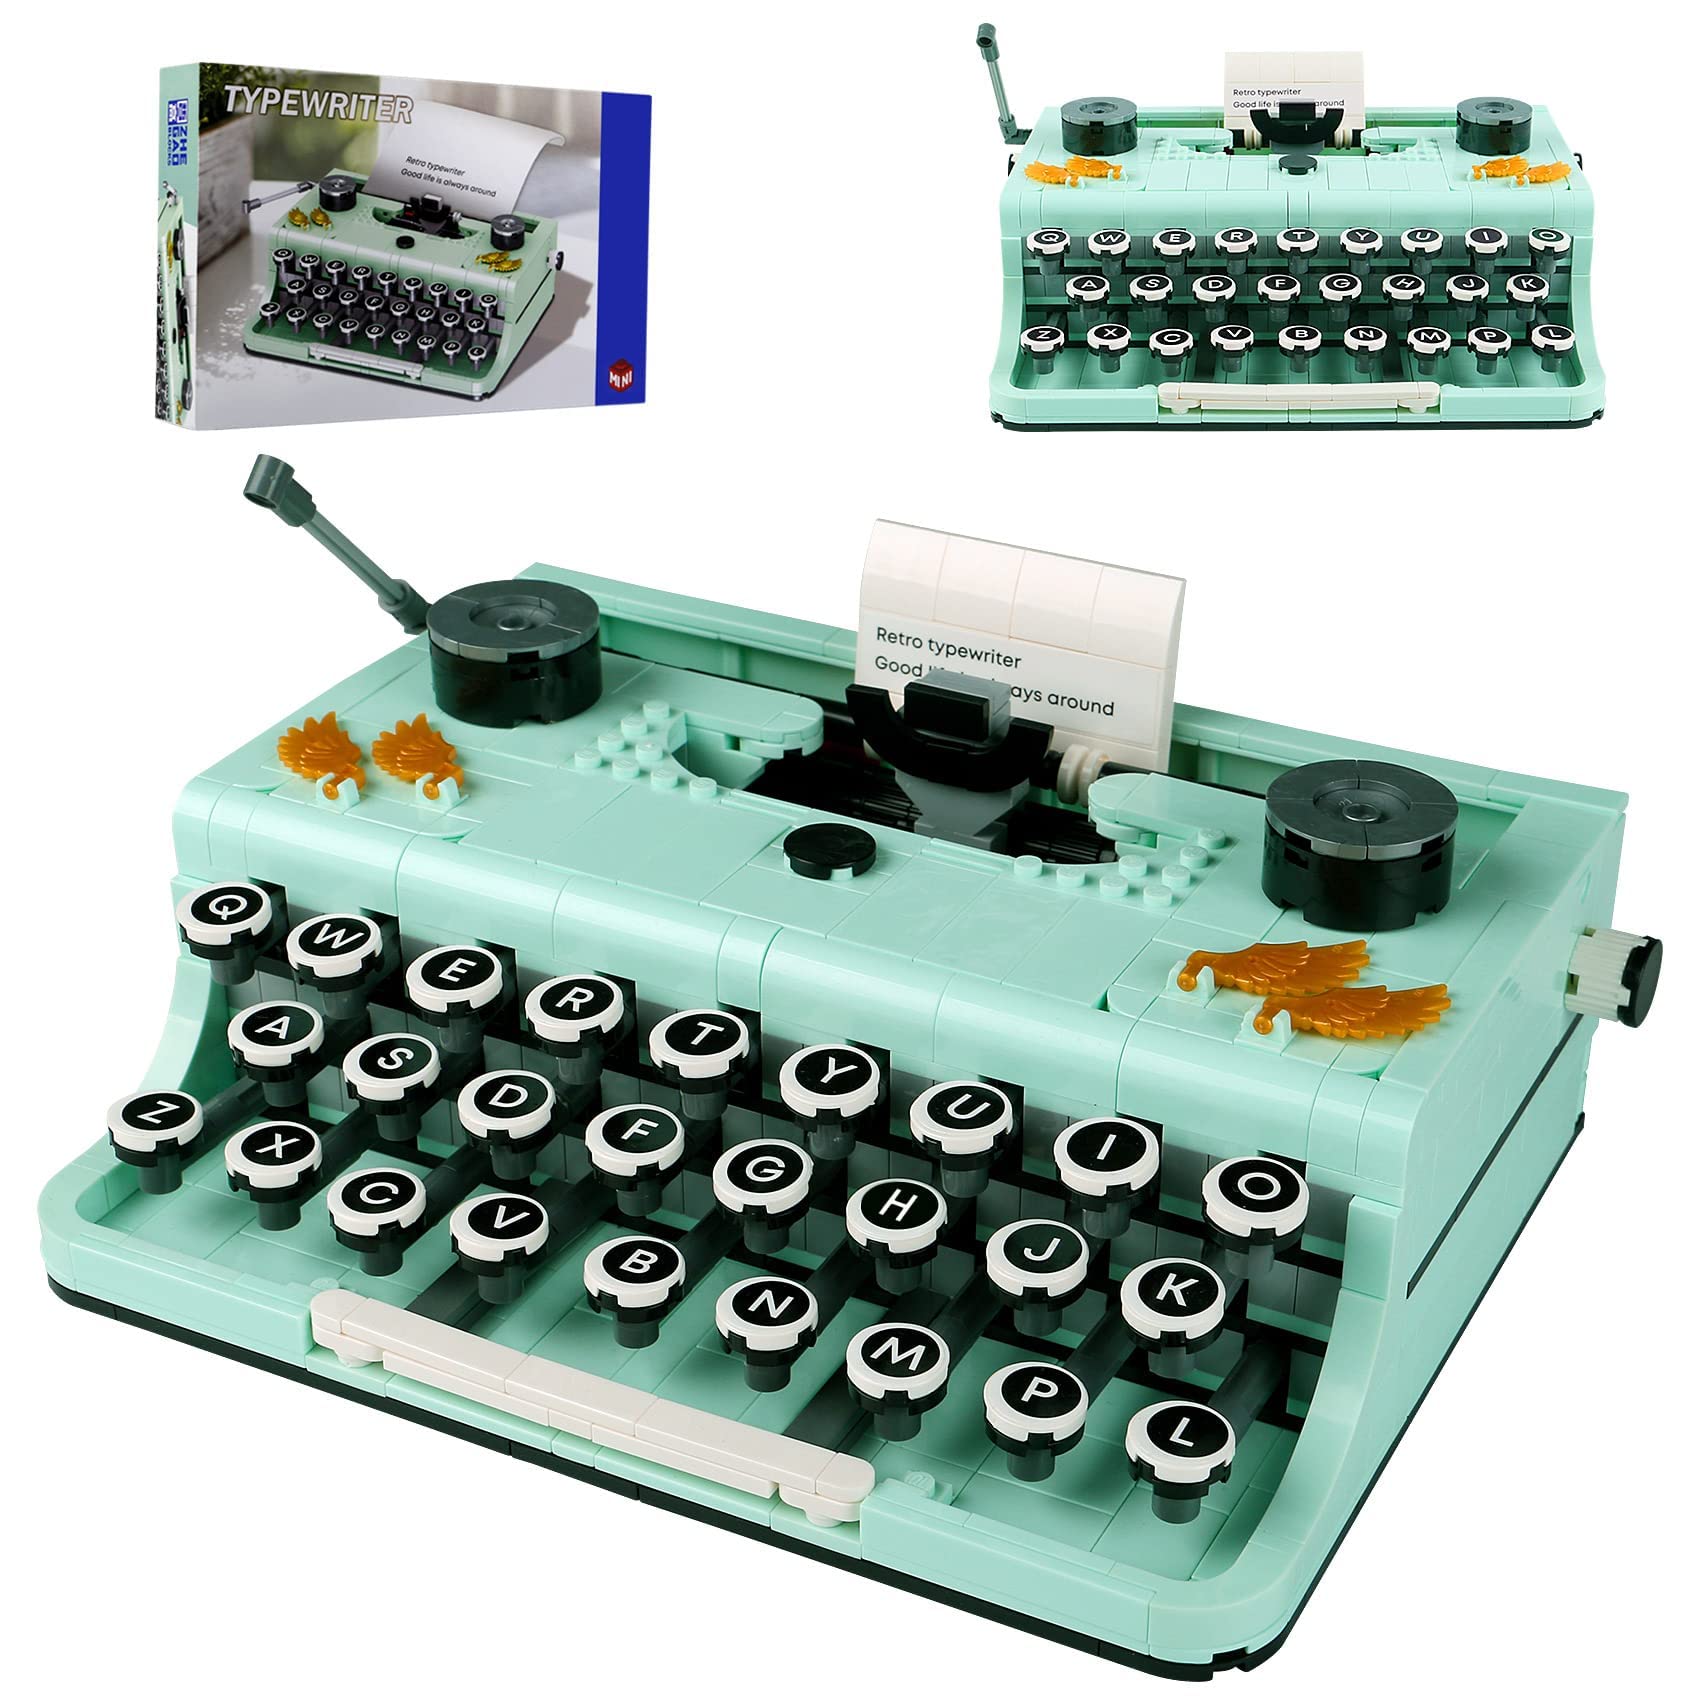 820PCS Ideas Retro Typewriter Building Blocks Toys Model,Classic Printer Models Building Set,Best Nostalgic Gift for 6+ Year Old Kids or Adults